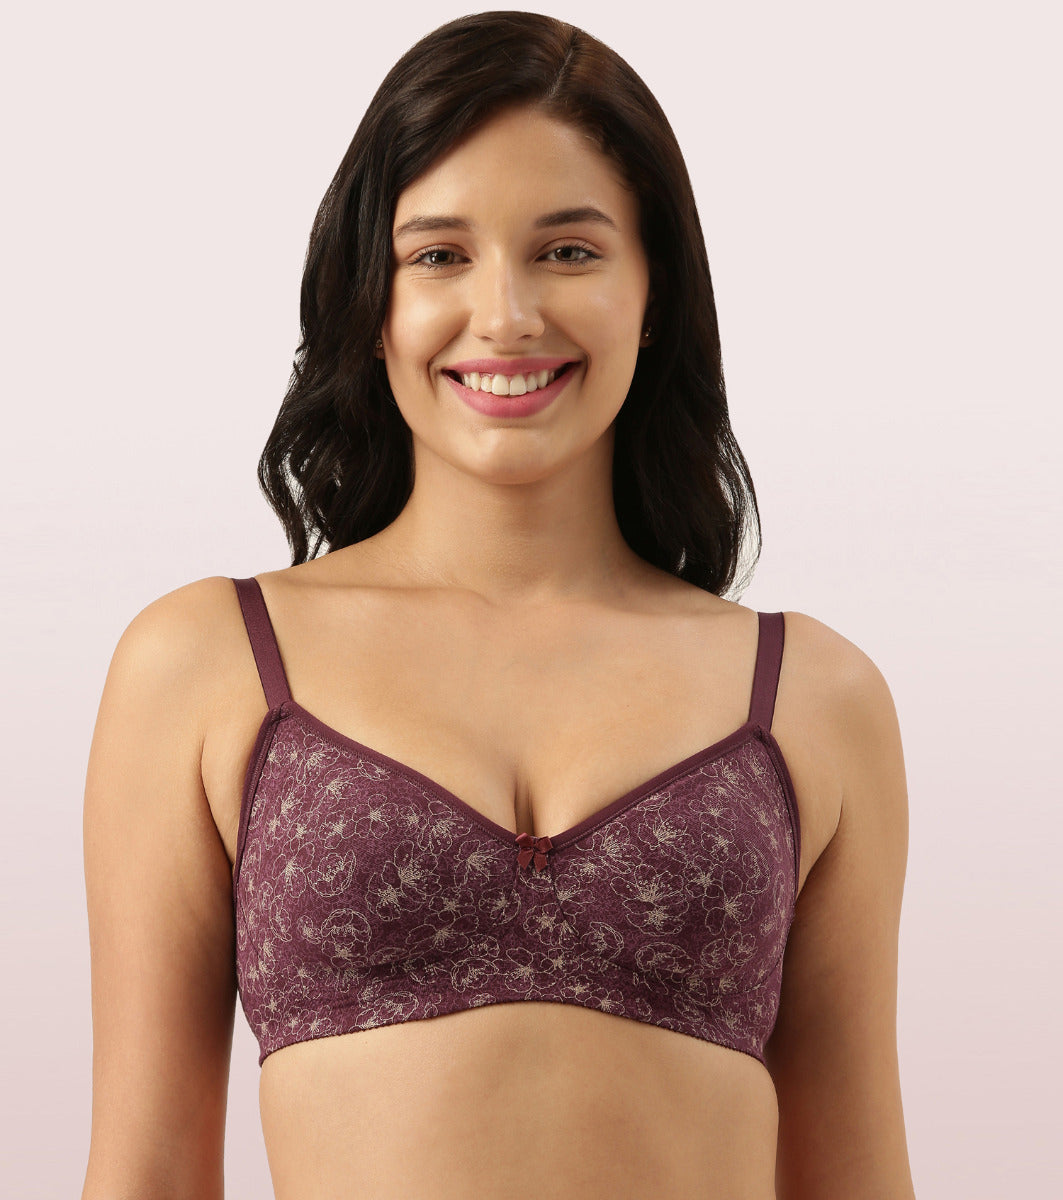 Enamor A042 Side Support Shaper Bra - Supima Cotton, Non-Padded & Wirefree  - Orchid Melange (34C)